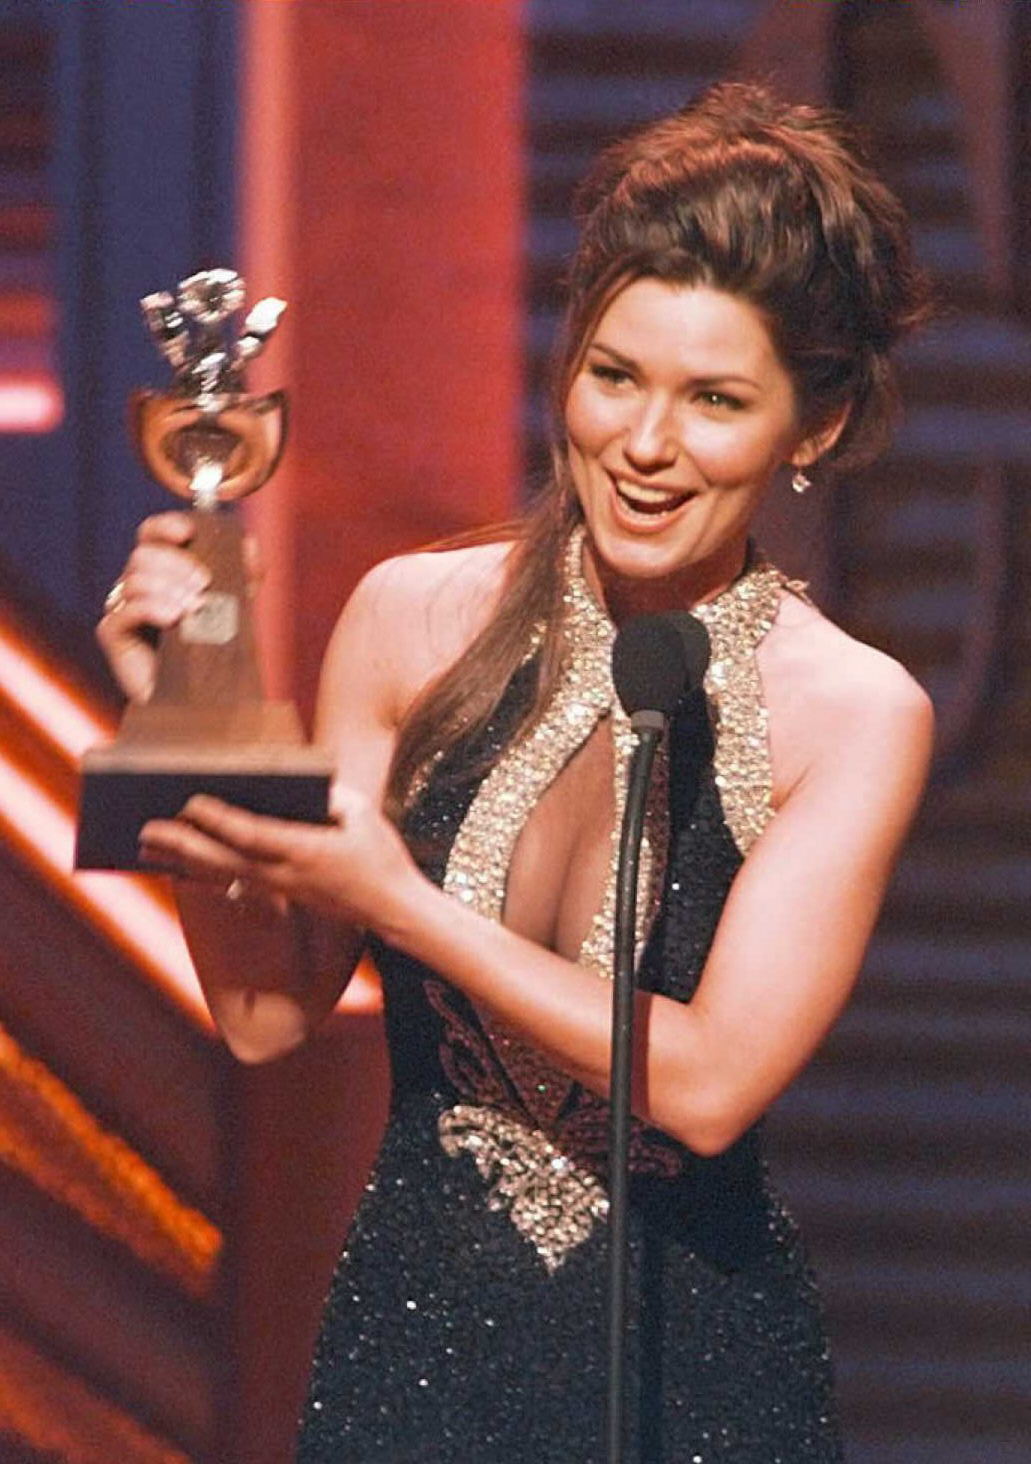 Shania Twain at the 31 Annual Country Music Awards on April 19, 1996 | Source: Getty Images